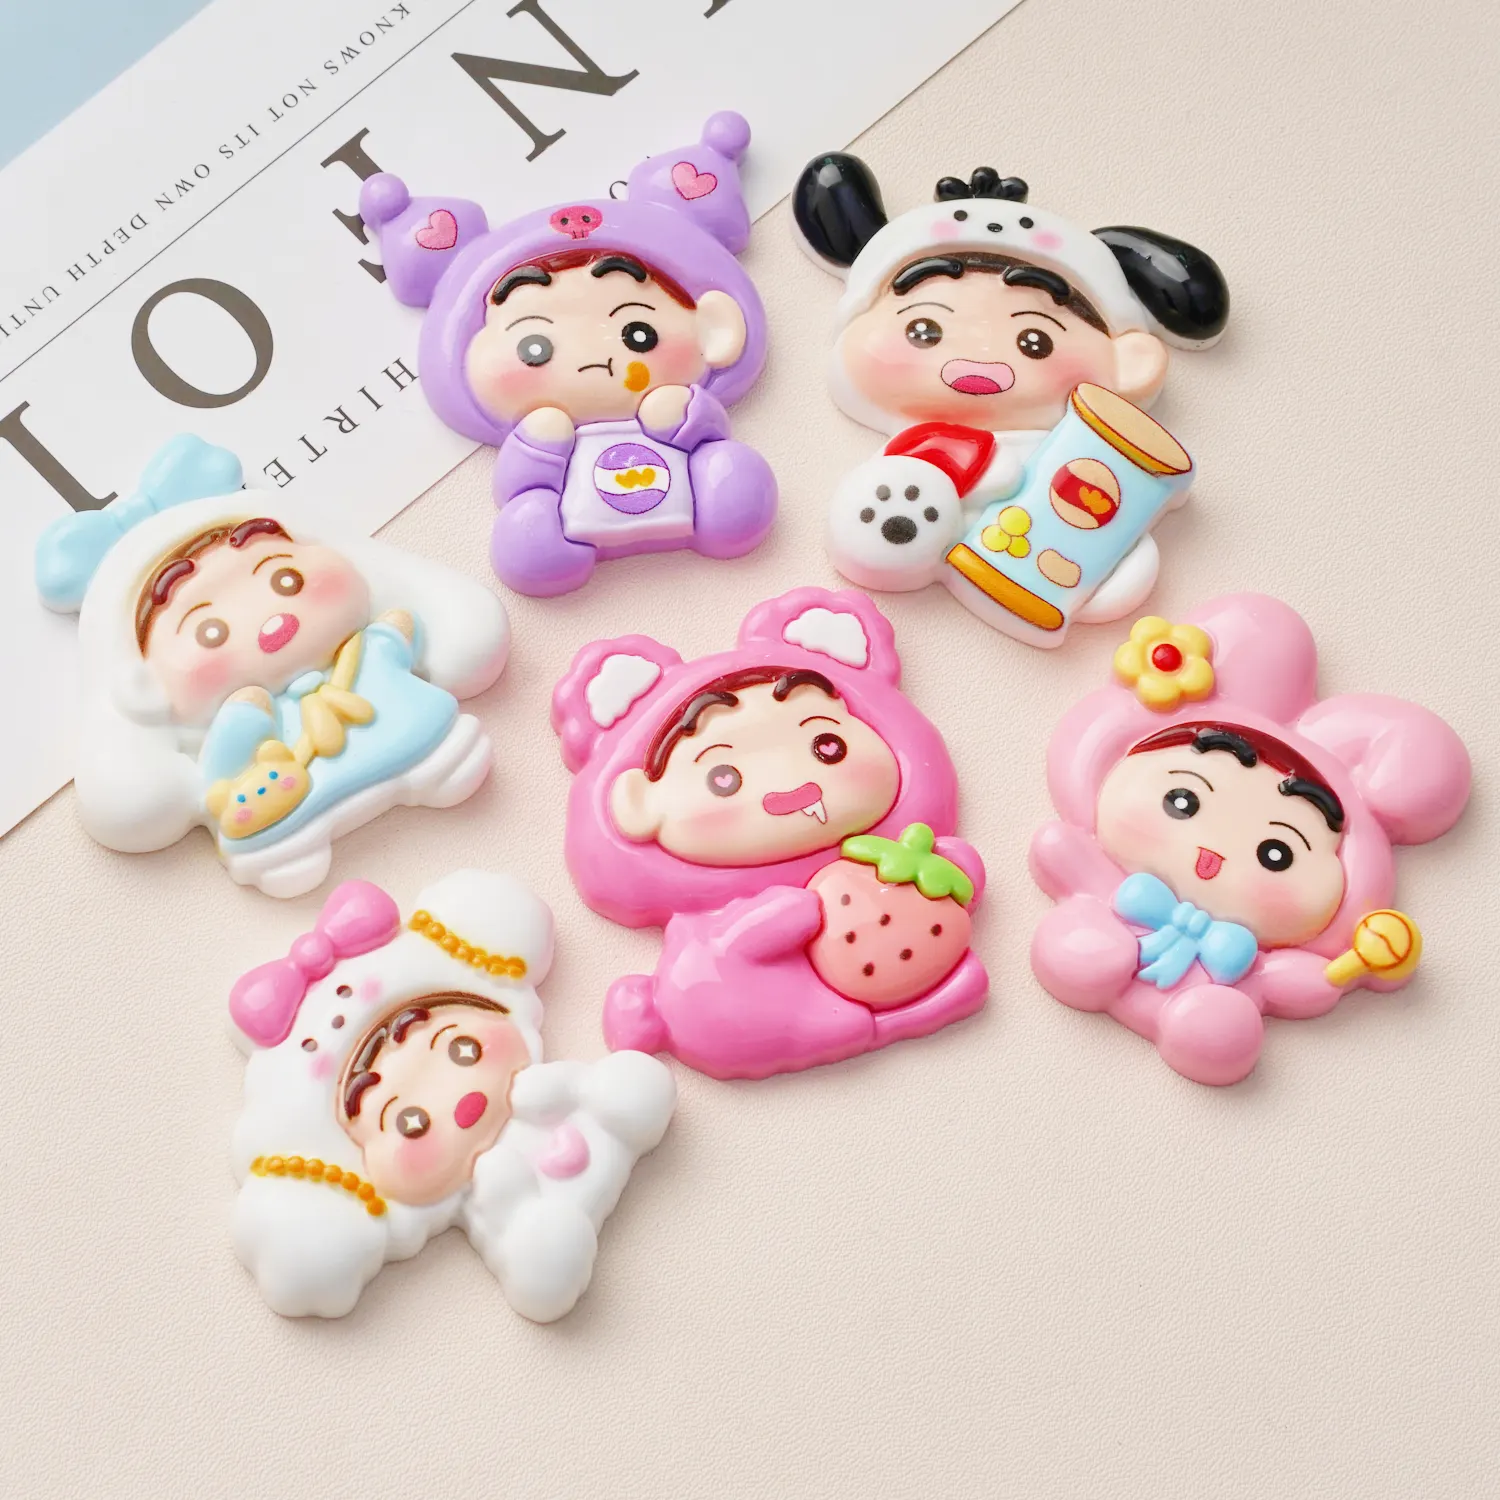 Kawaii hot selling sanrio Xiao Xin flatback charms resin accessories for key chain pendant refrigerator magnet phone case DIY